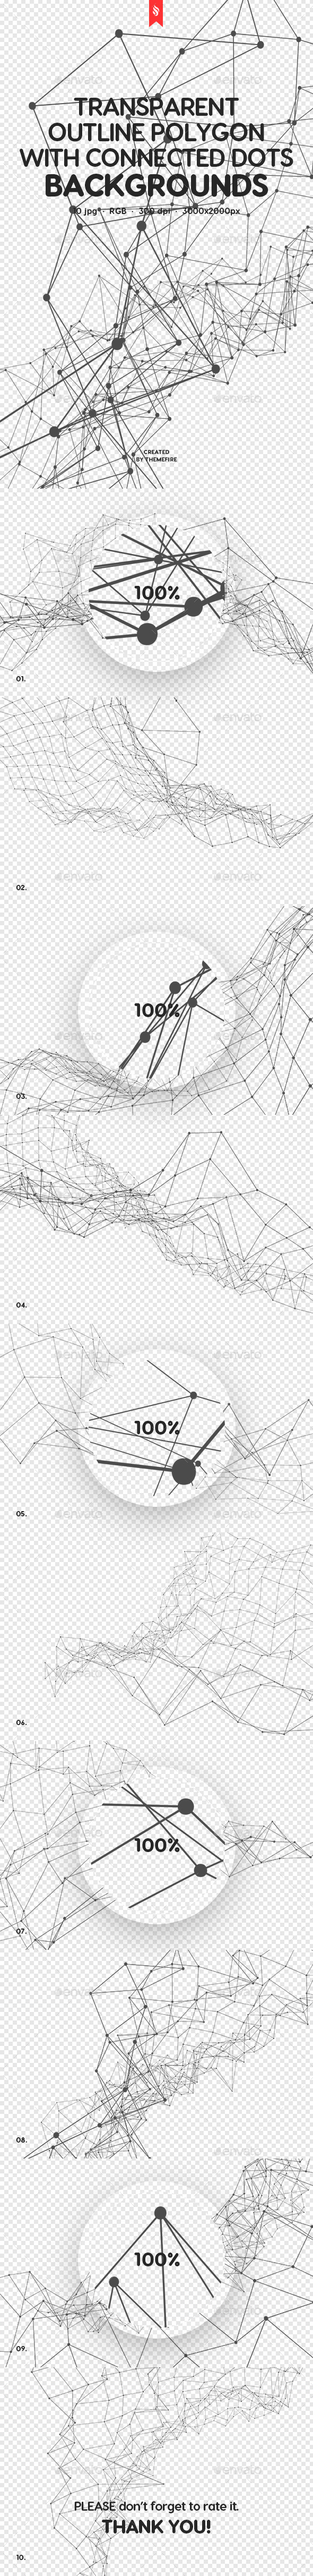 Transparent Outline Polygon with Connected Dots Backgrounds